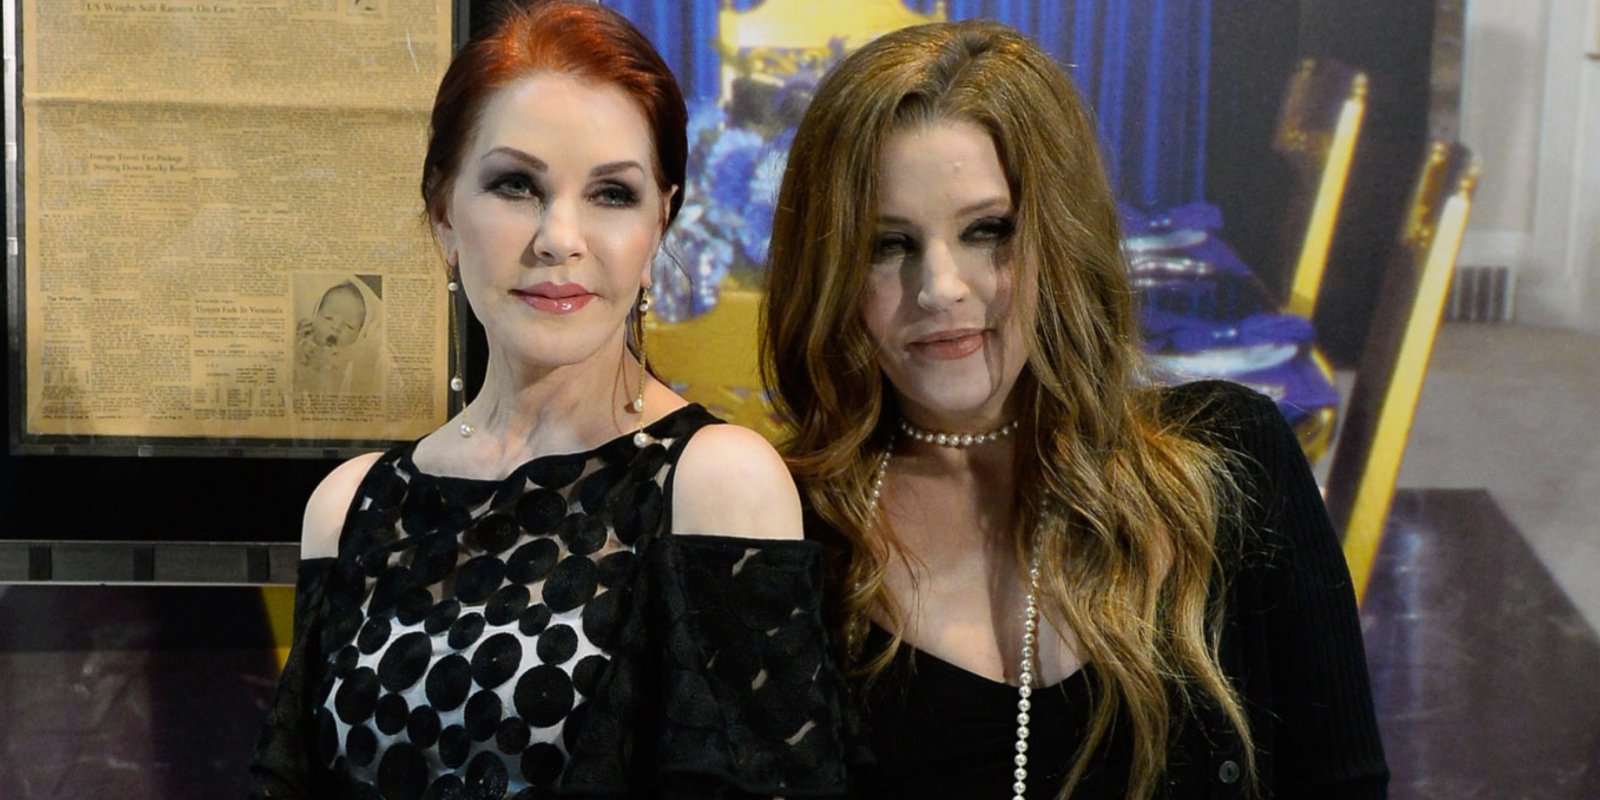 Priscilla Presley and Lisa Marie Presley photographed in 2015.